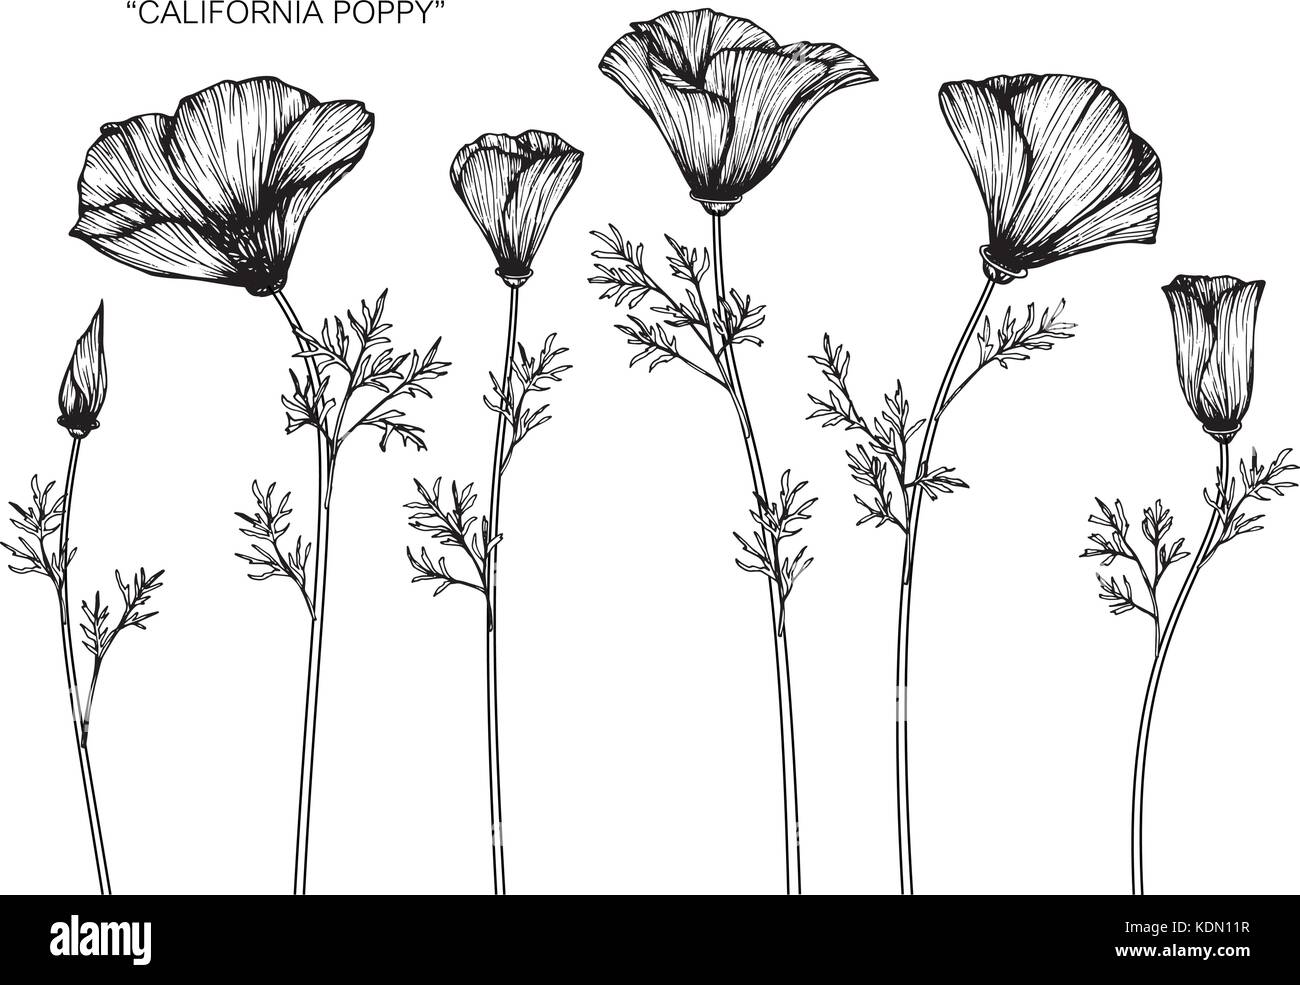 California poppy flower drawing illustration. Black and white with line ...